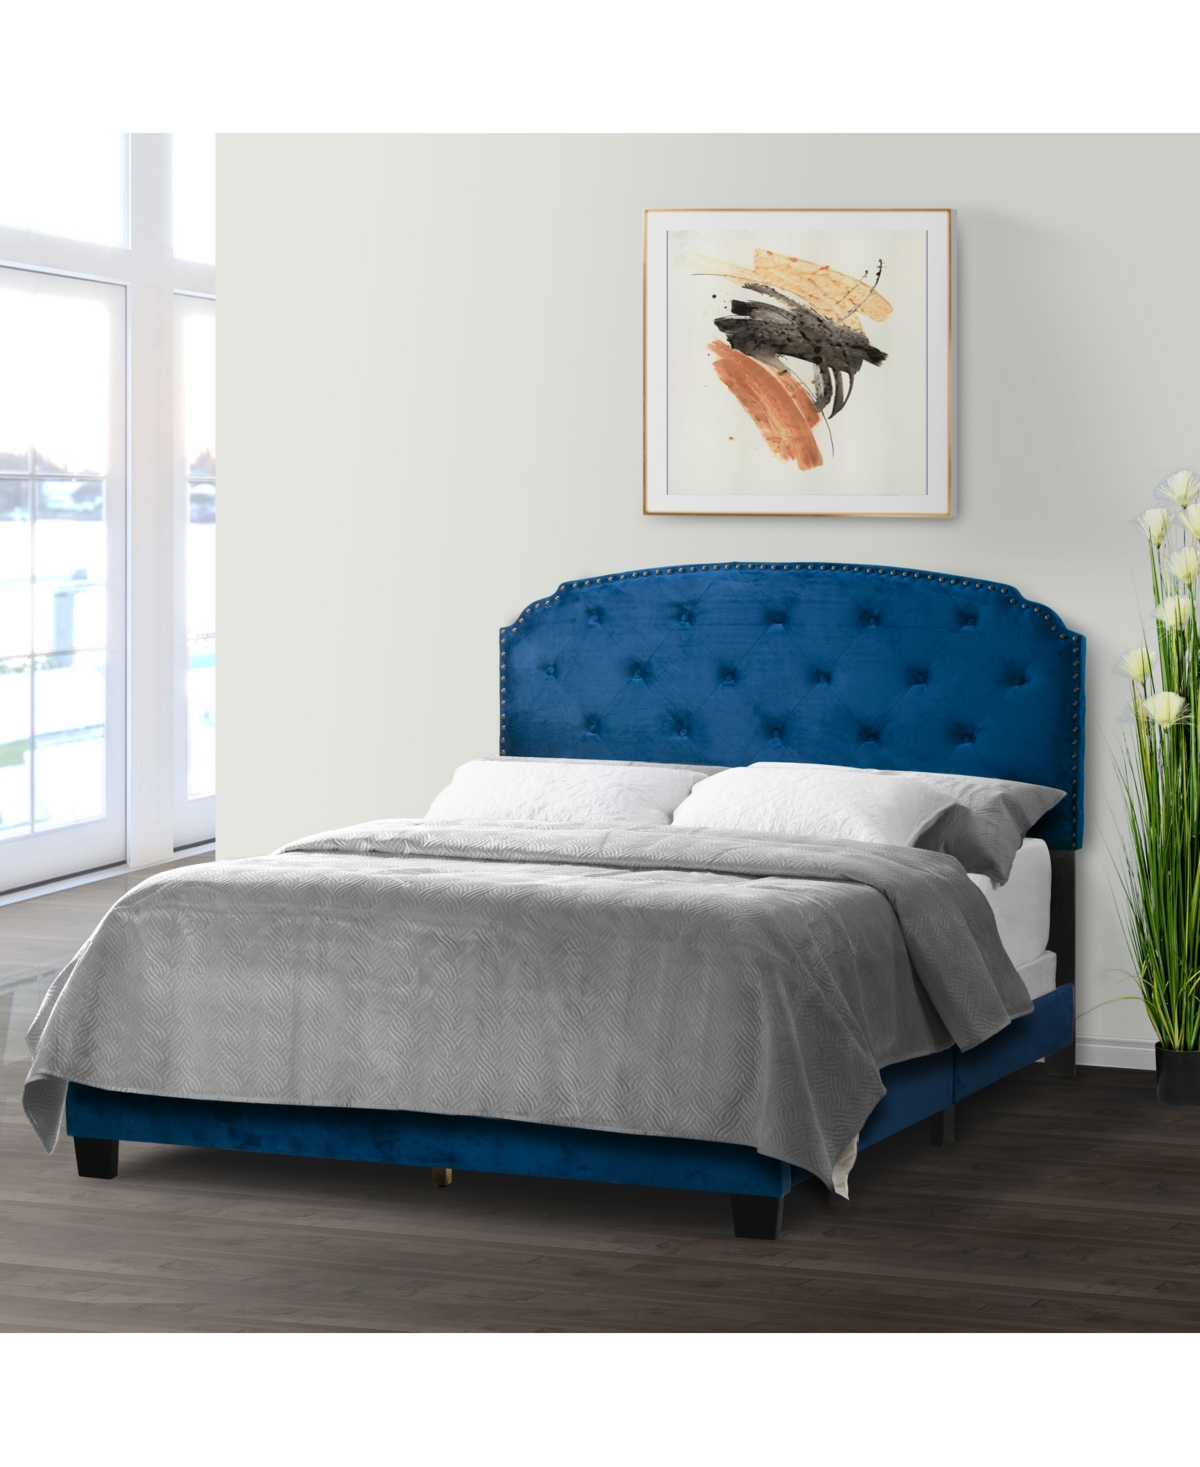 Shop Glamour Home 51.75" Arin Fabric, Rubberwood Queen Bed In Navy